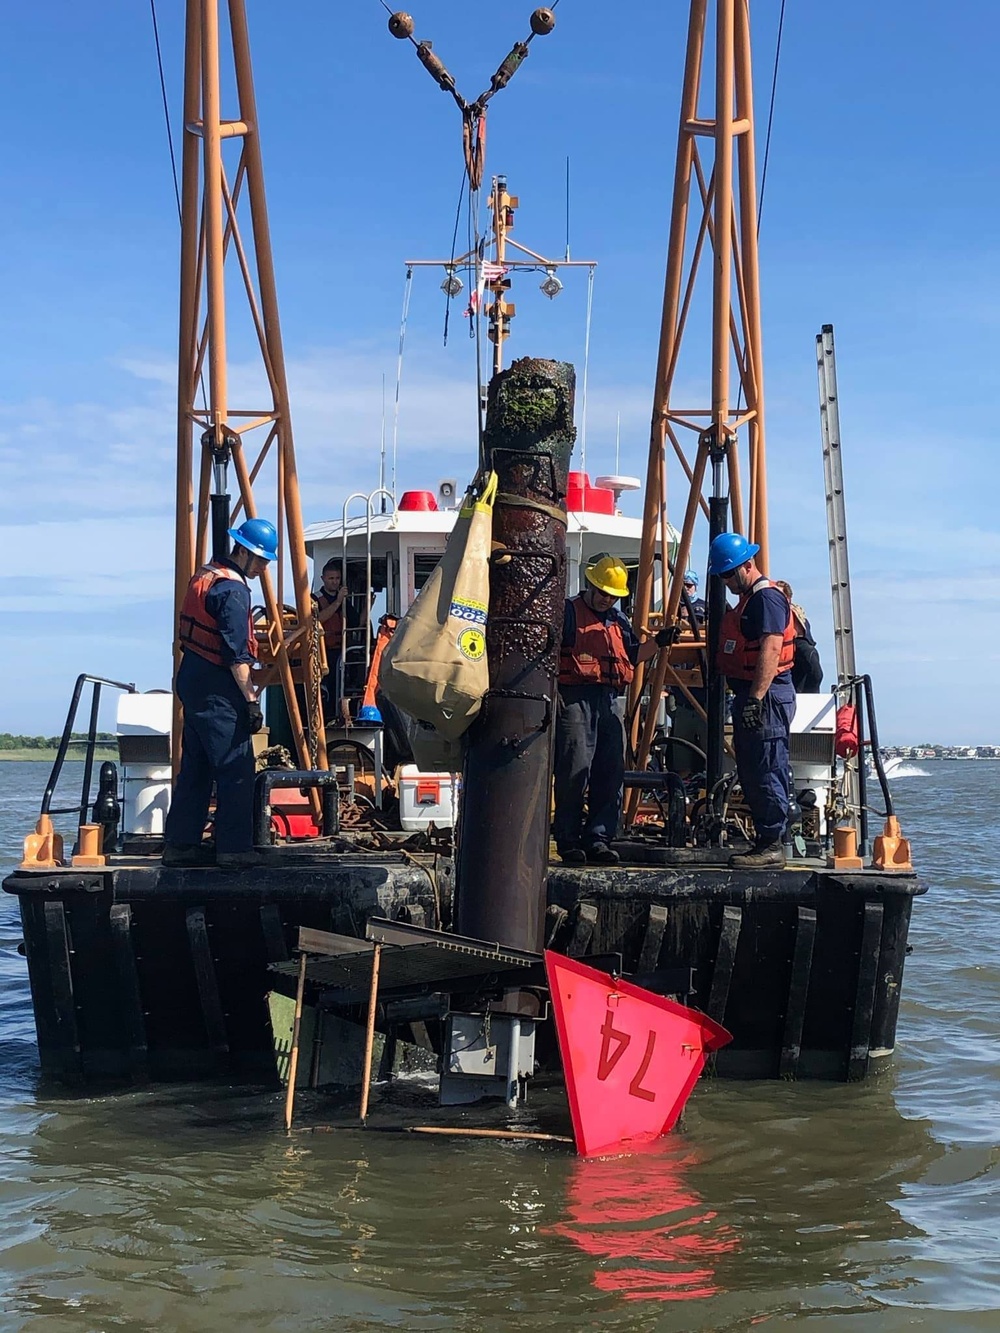 Coast Guard asks public to use caution during construction on New Jersey Intracoastal Waterway  PHILADELPHIA — The Coast Guard is asking the public to exercise caution while operating boats and watercraft on the